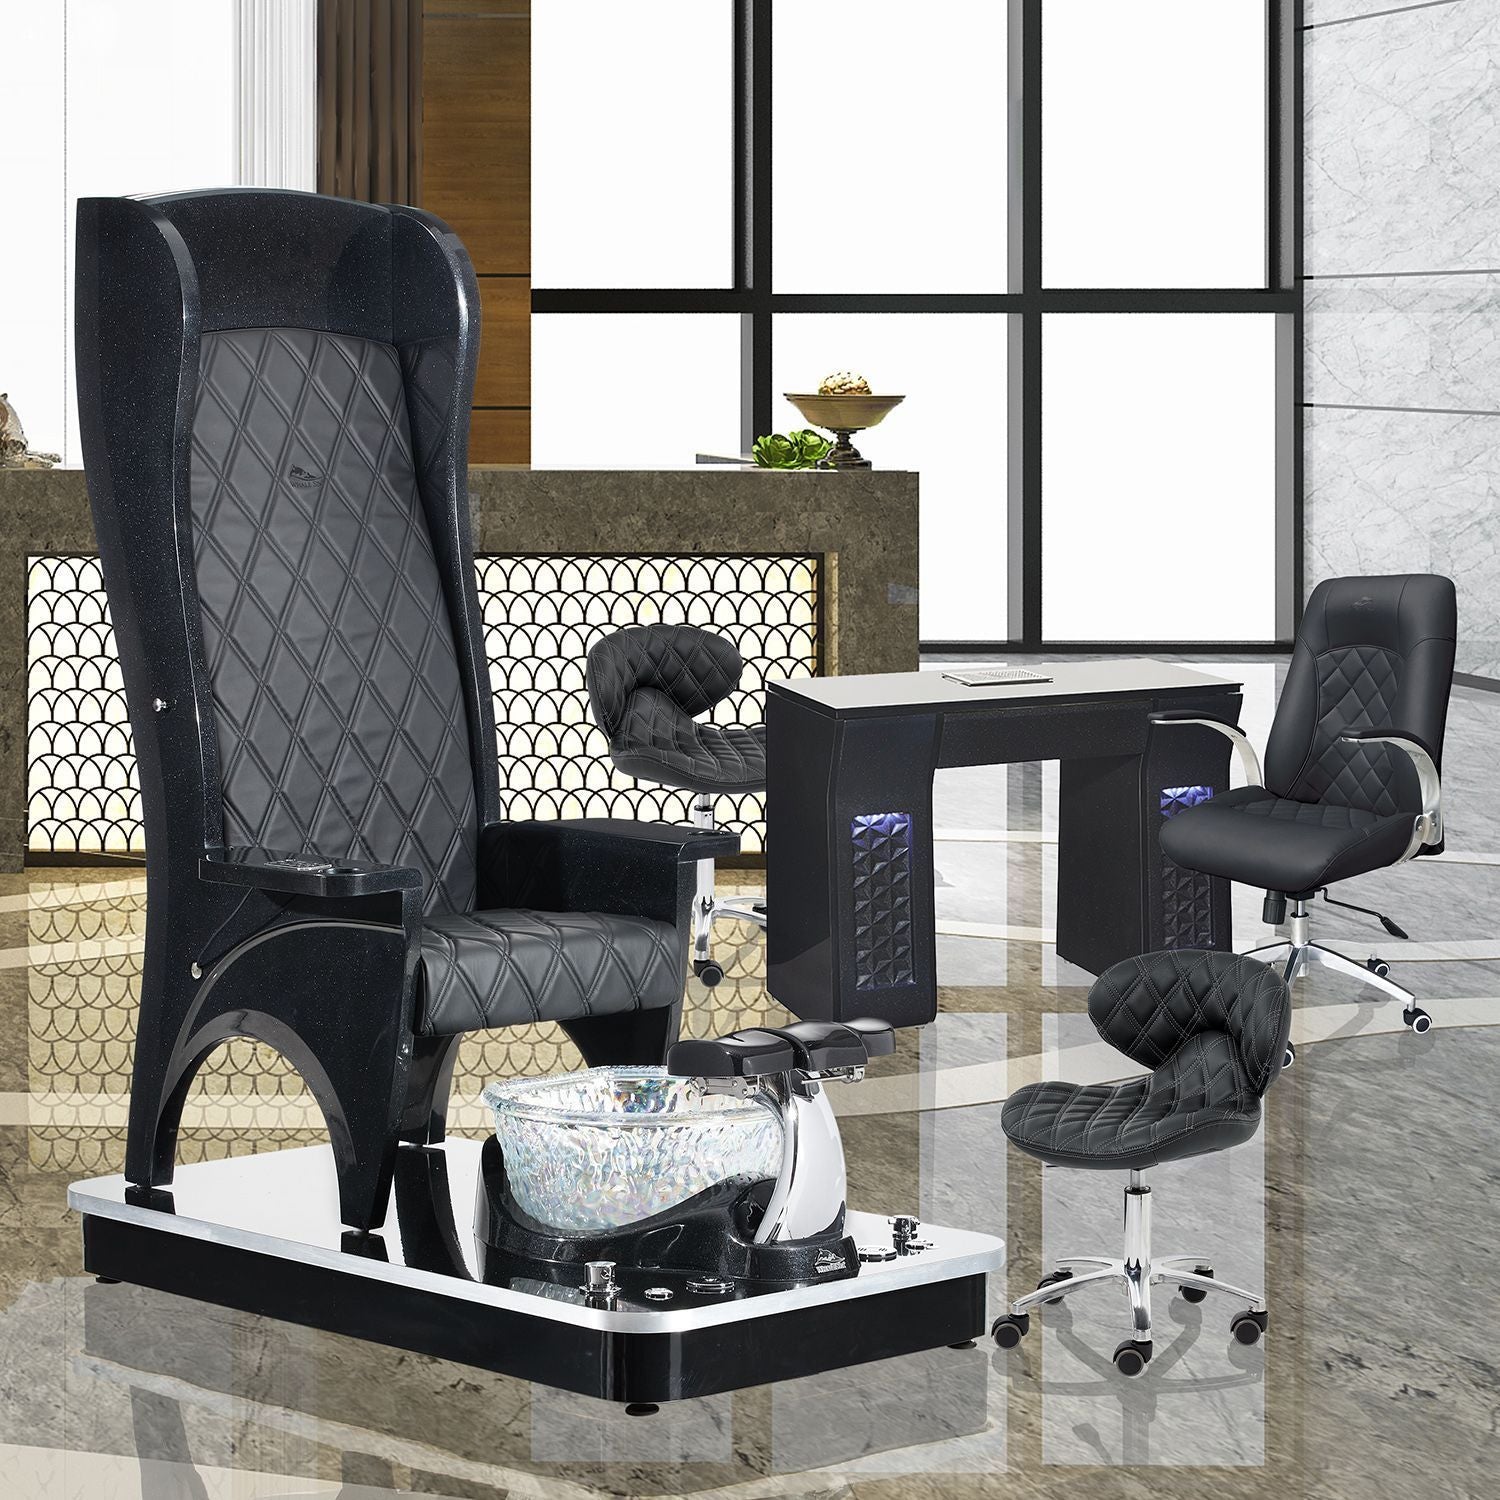 Whale Spa Monarch Pedicure Chair - the most luxurious pedicure chair with Enduro vegan leather. Whale Spa salon furniture and nail salon supplies. Classy and modern pedicure chair with massage and antimicrobial.